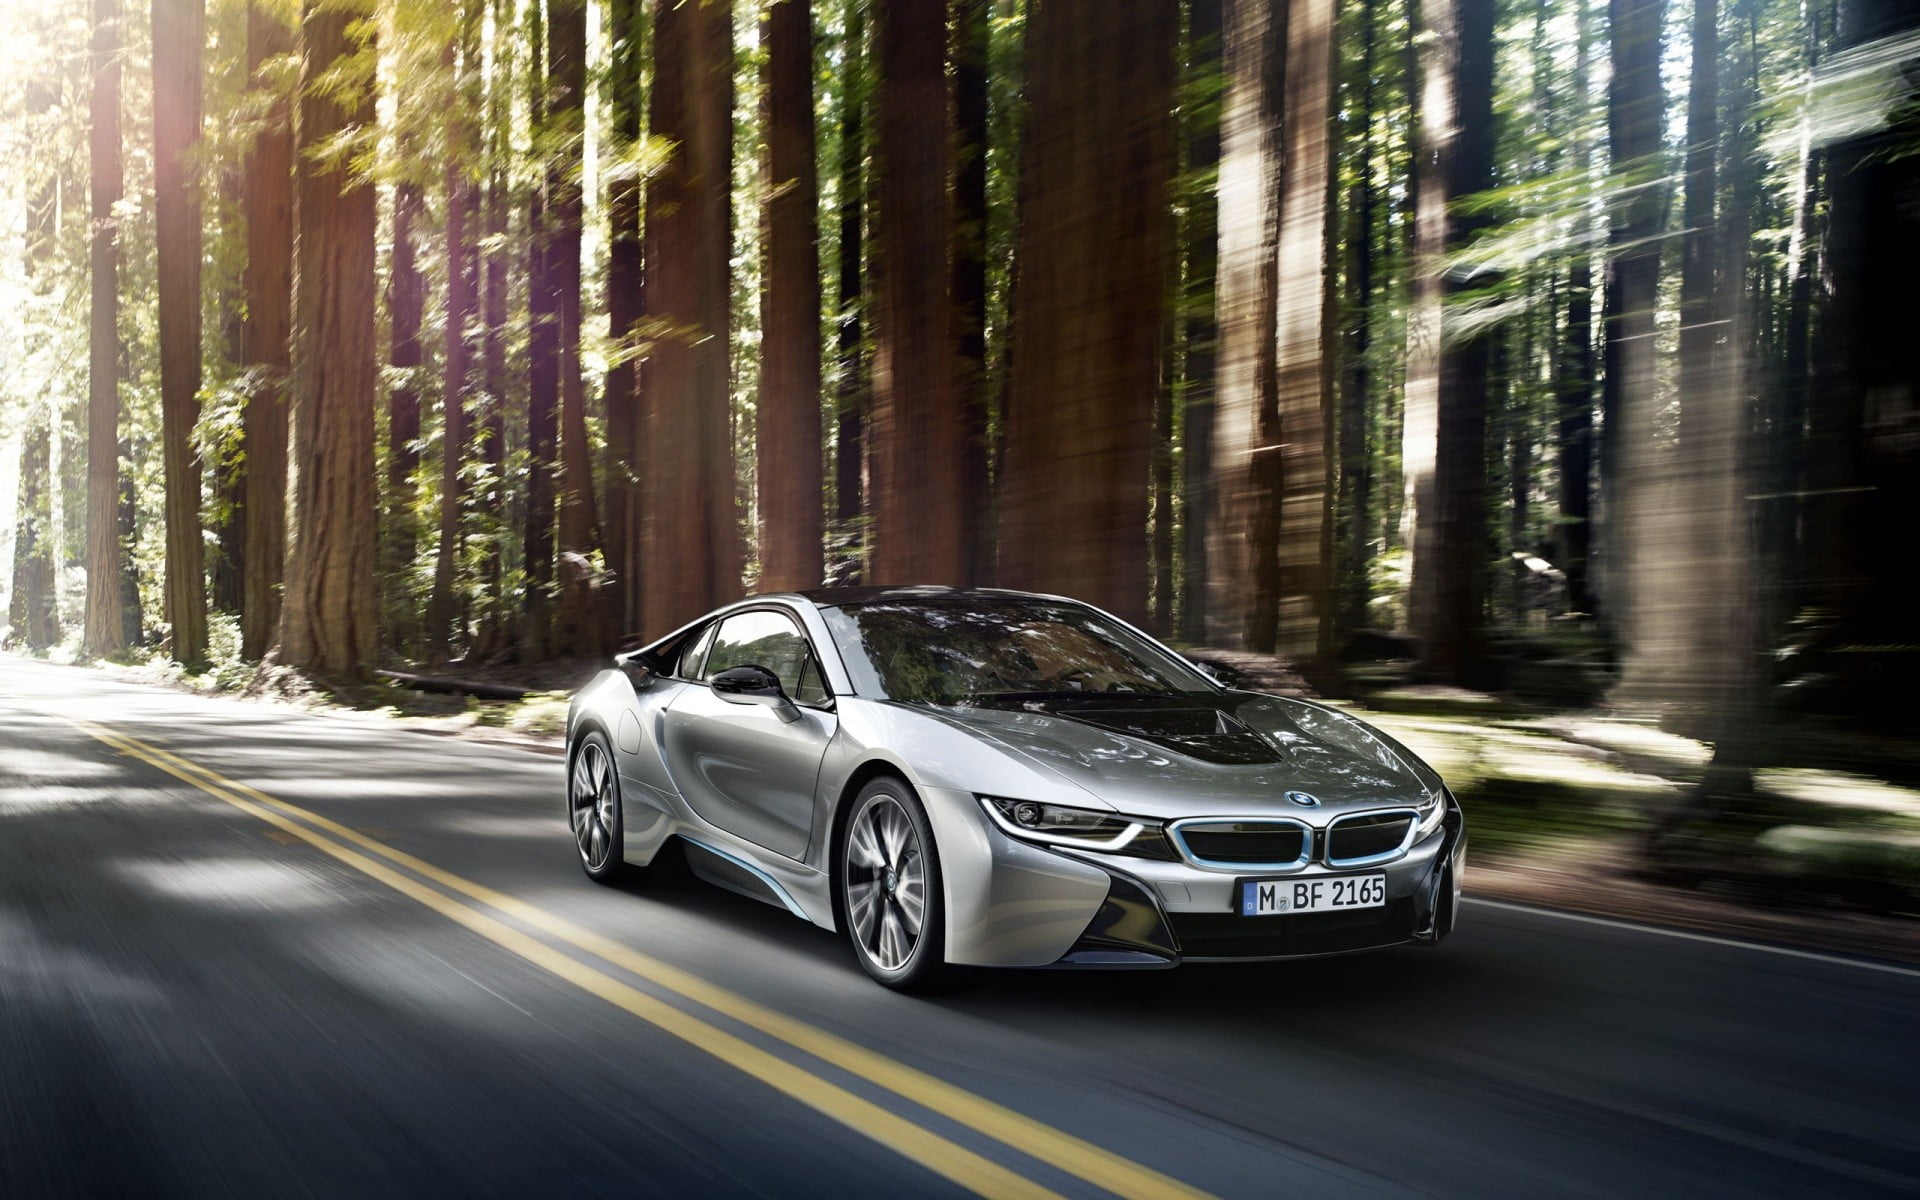 silver BMW coupe, BMW, BMW i8, road, trees